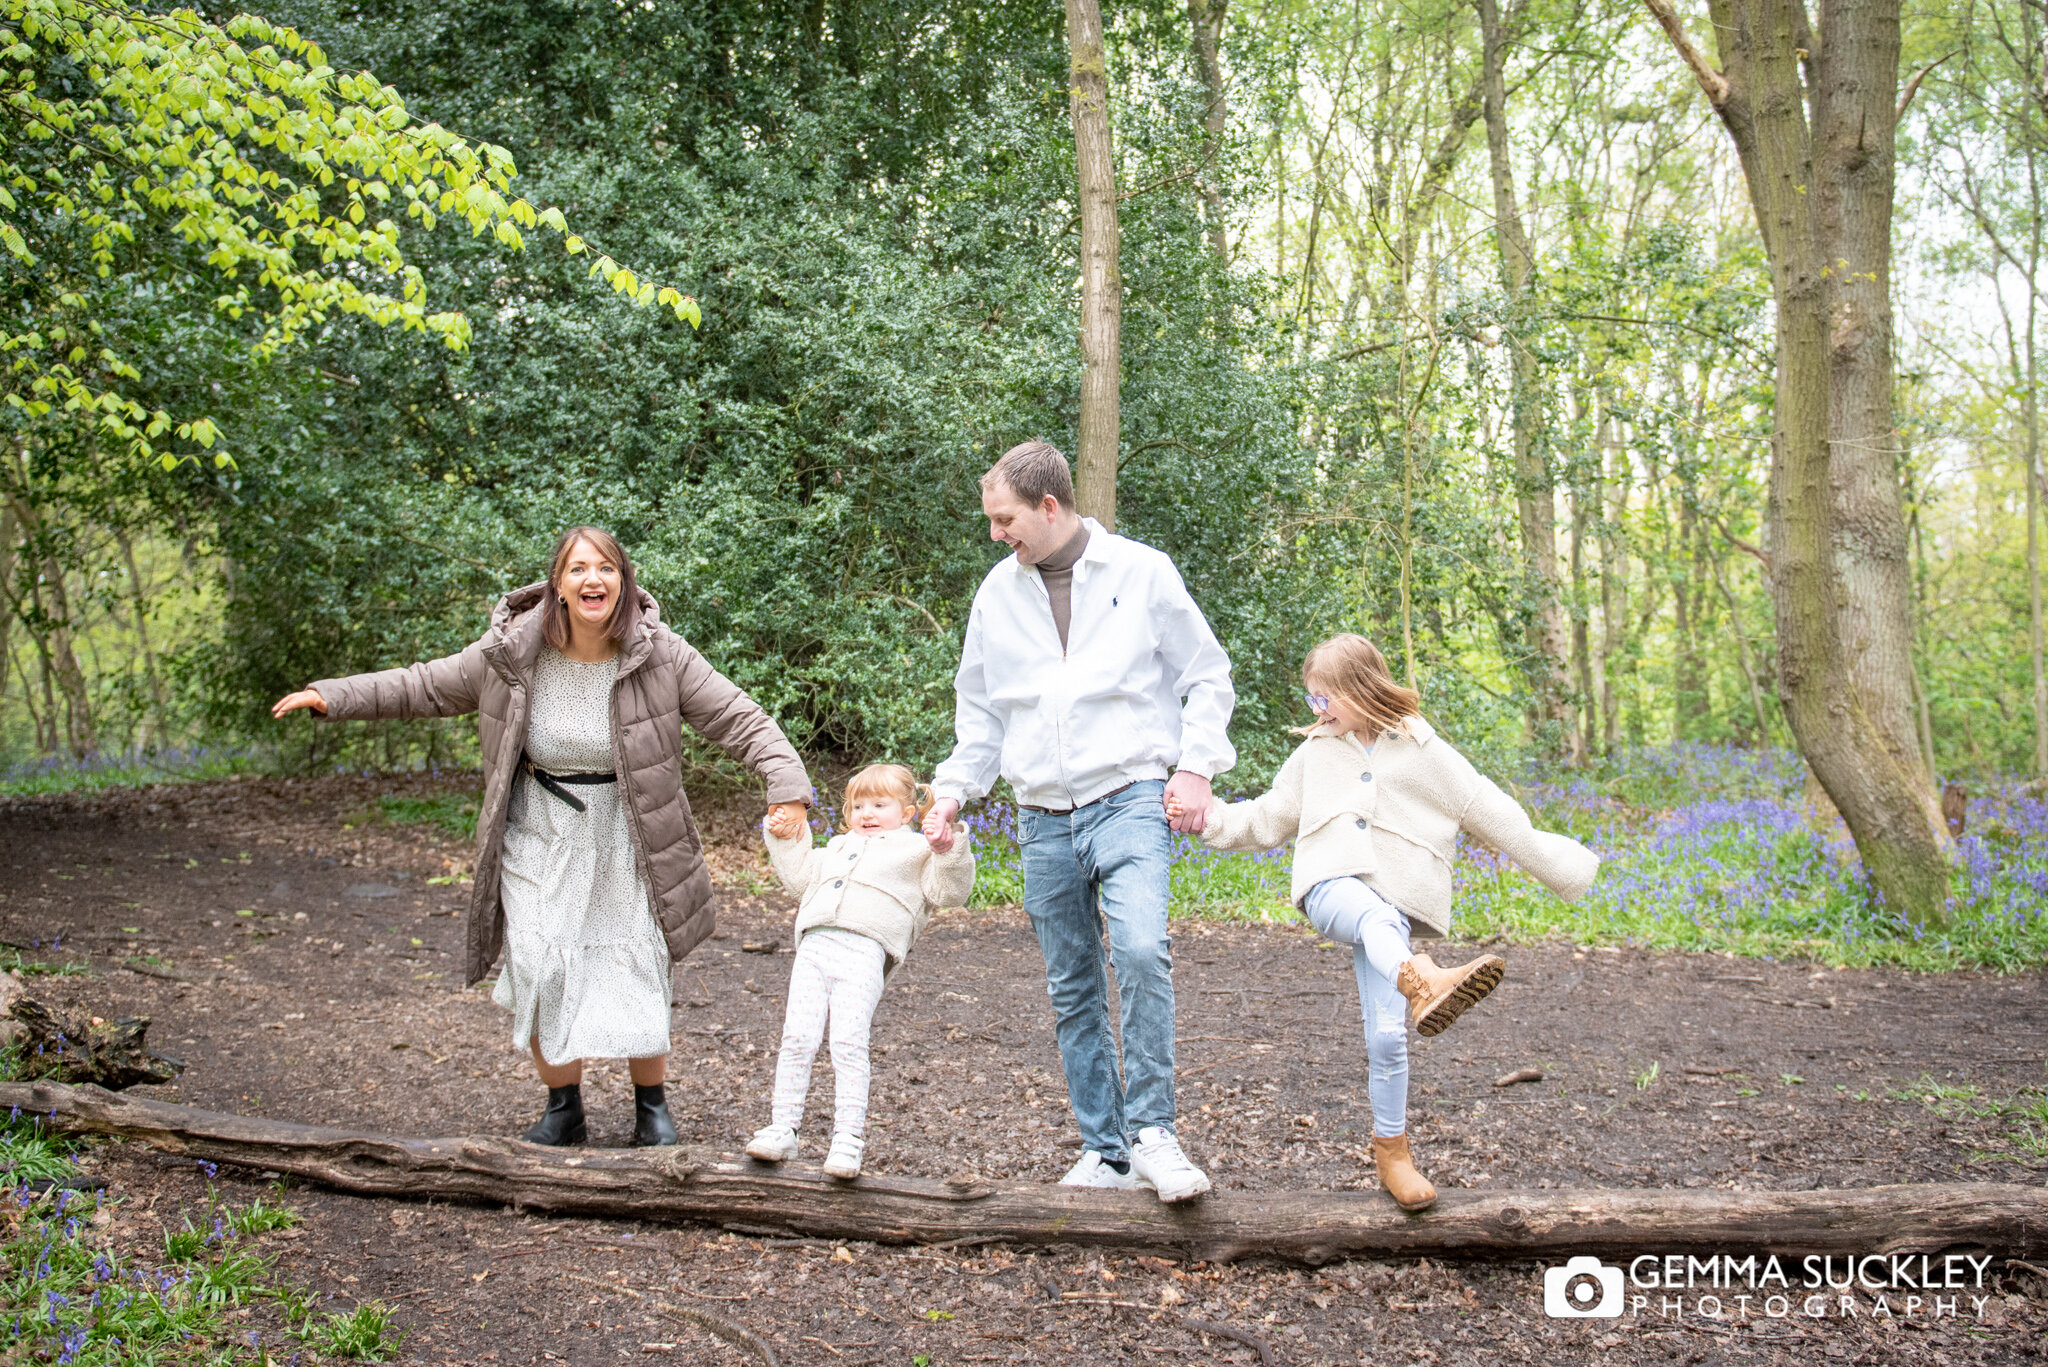 fun photo of a family balancing on a log in hirst wood